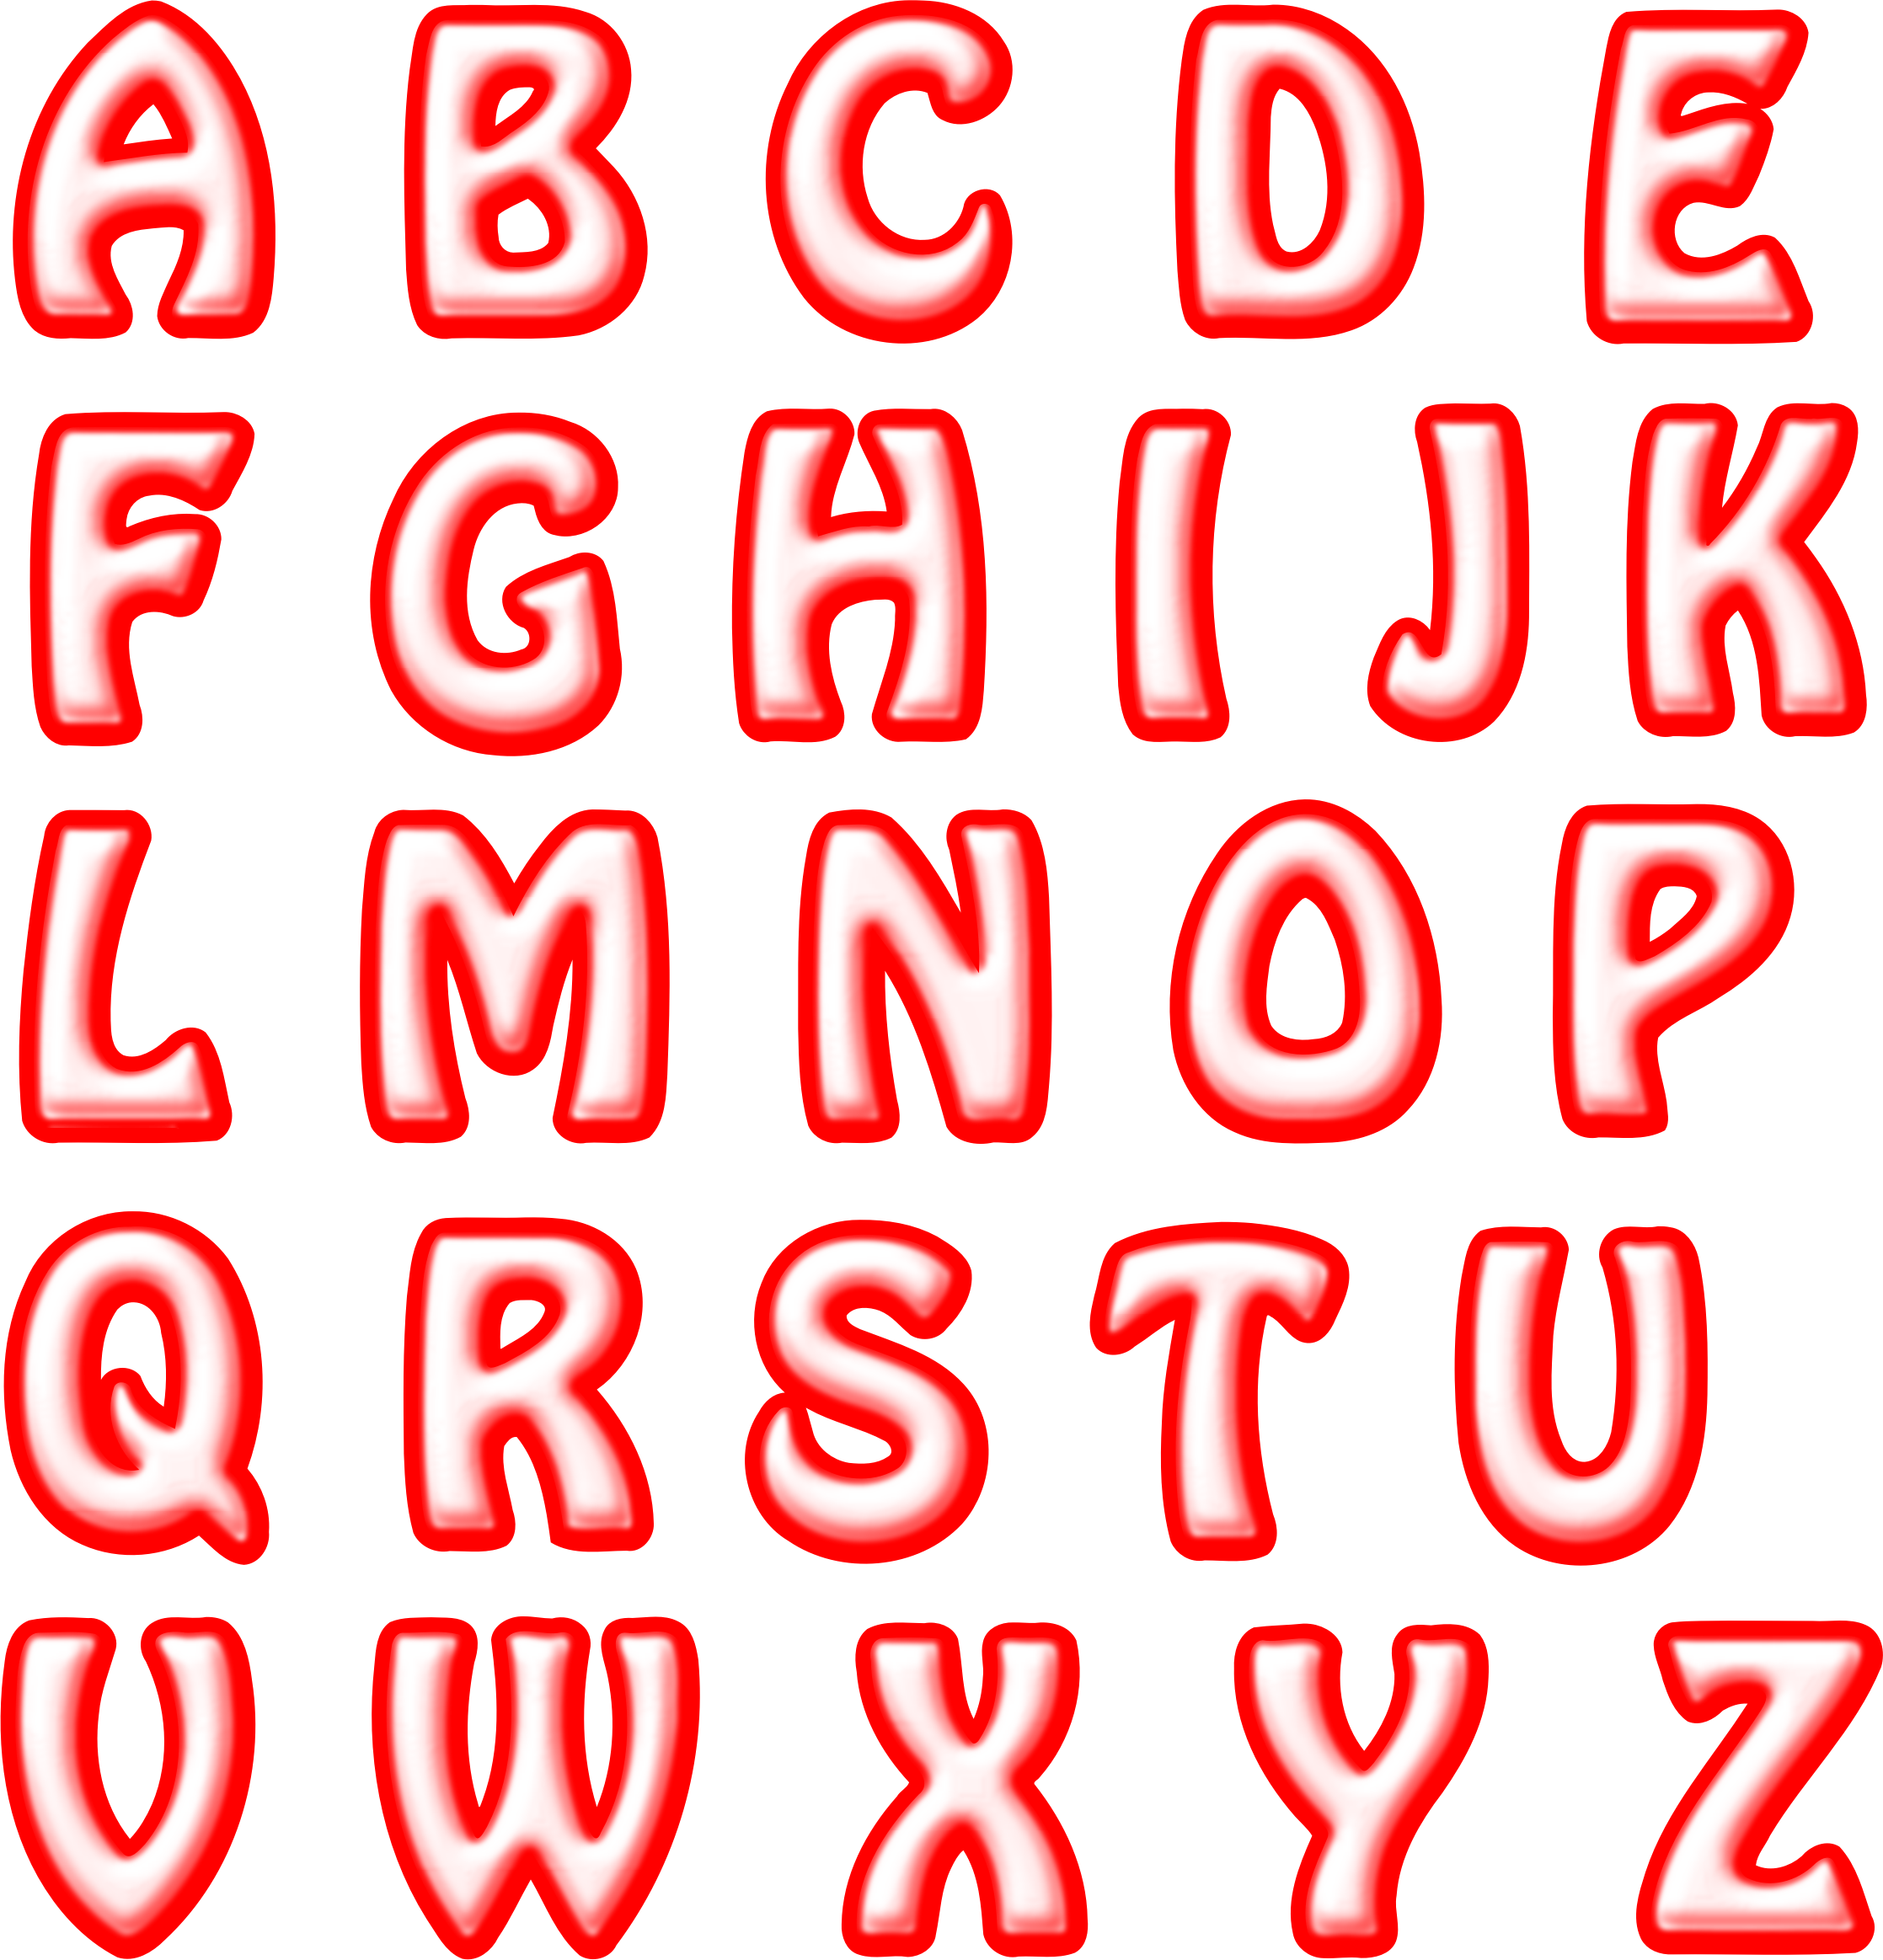 Red Alphabet Letters vector clipart image.